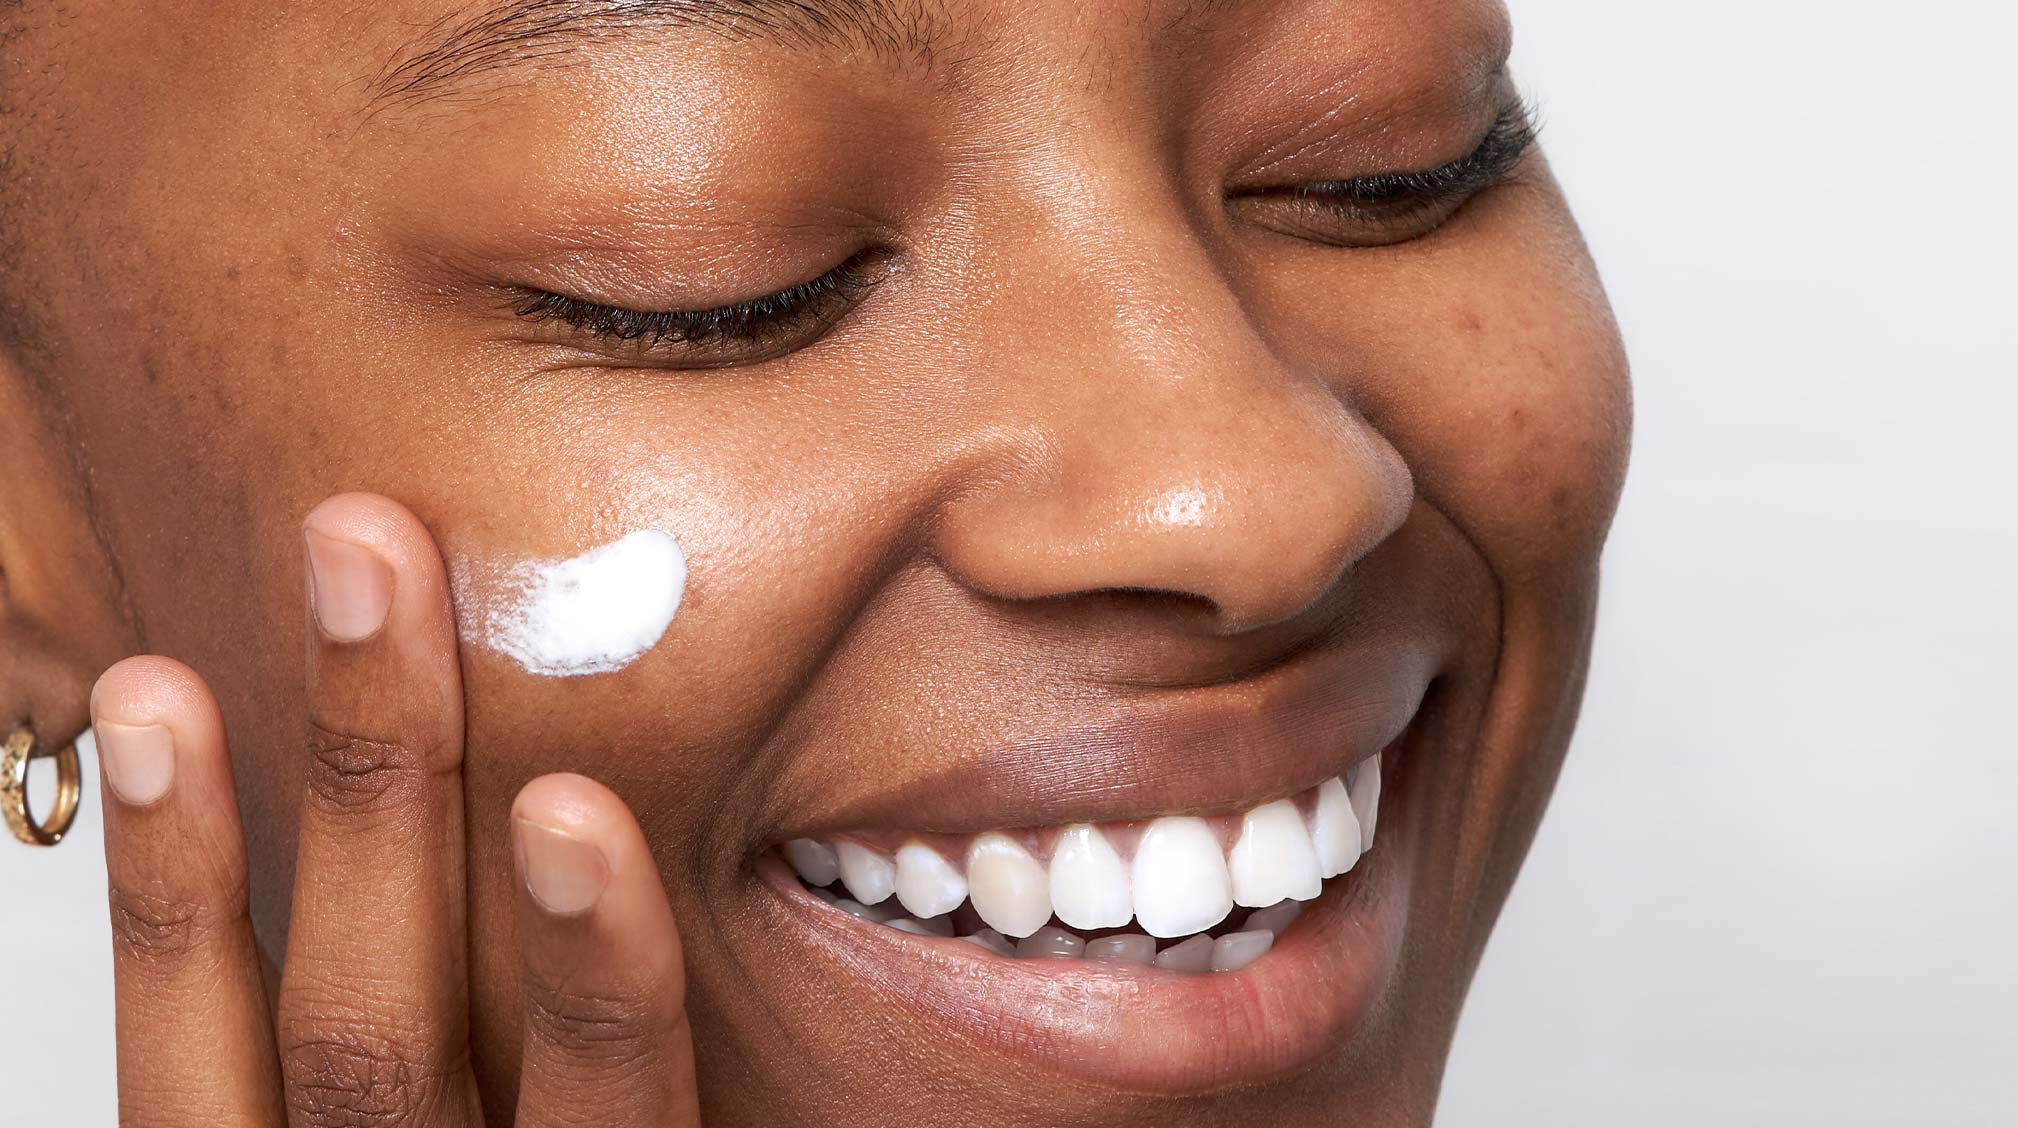 Skin-Smoothing Advice: How to Treat Uneven Skin Texture